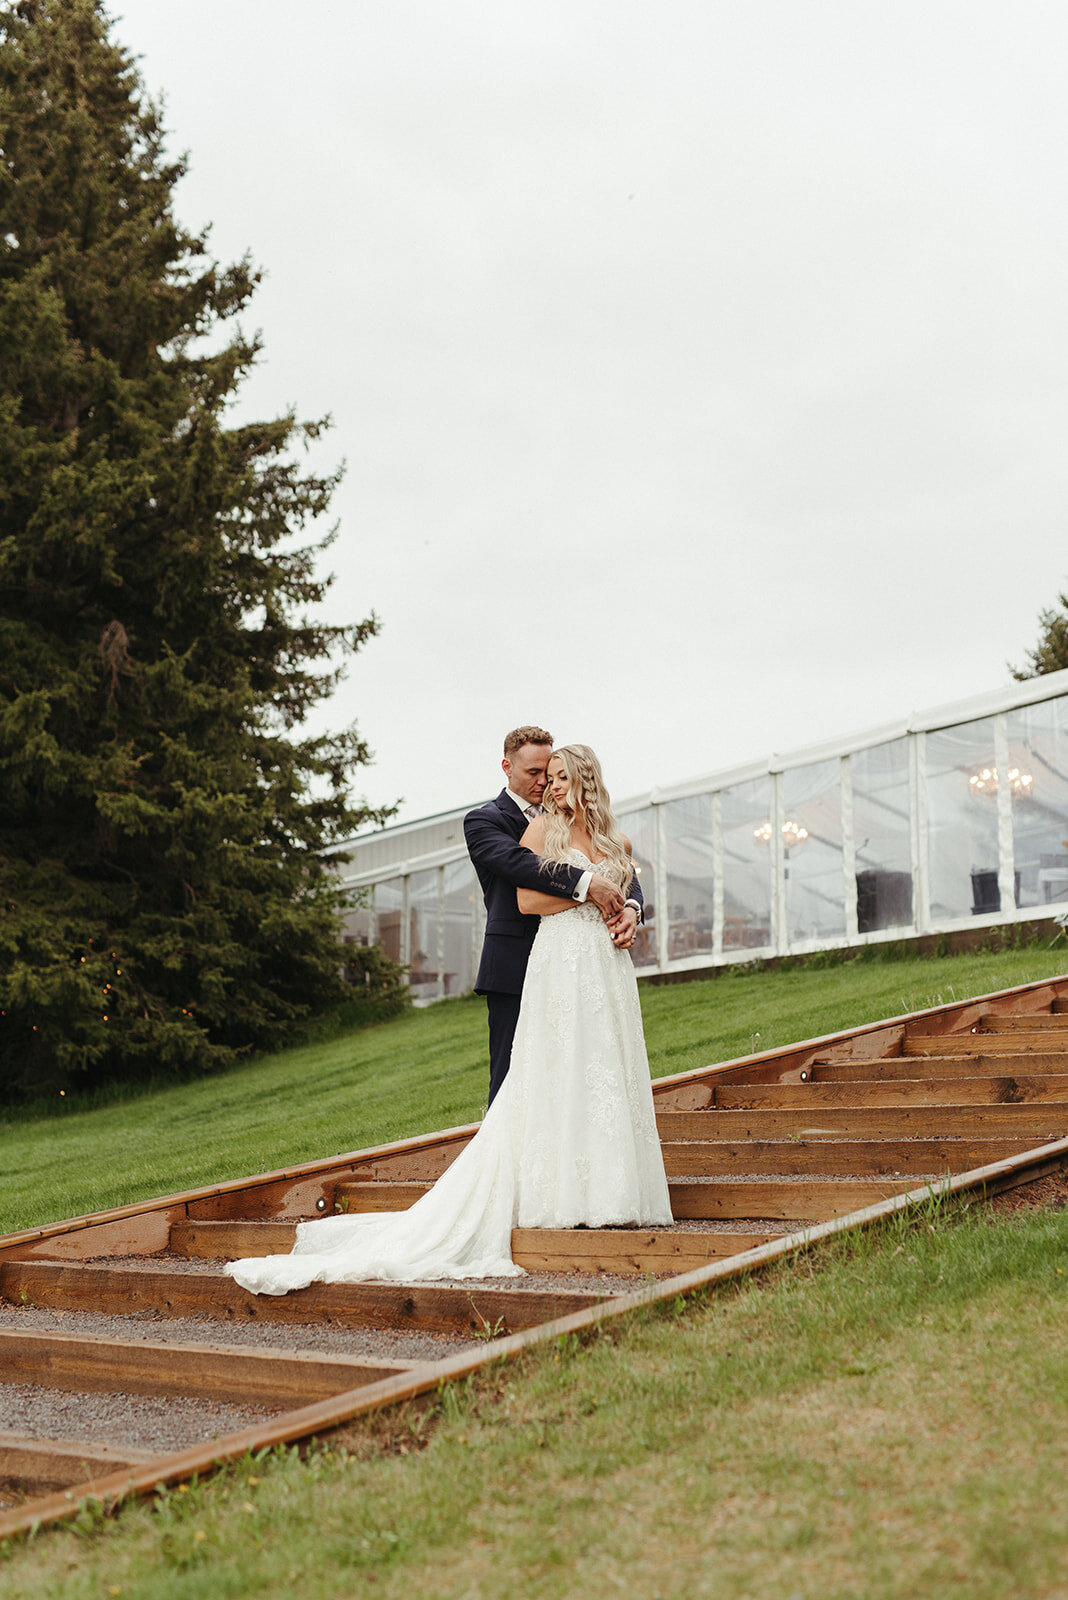 Bride and groom on the stairs at Pine & Pond, a natural picturesque wedding venue in Ponoka, AB, featured on the Brontë Bride Vendor Guide.